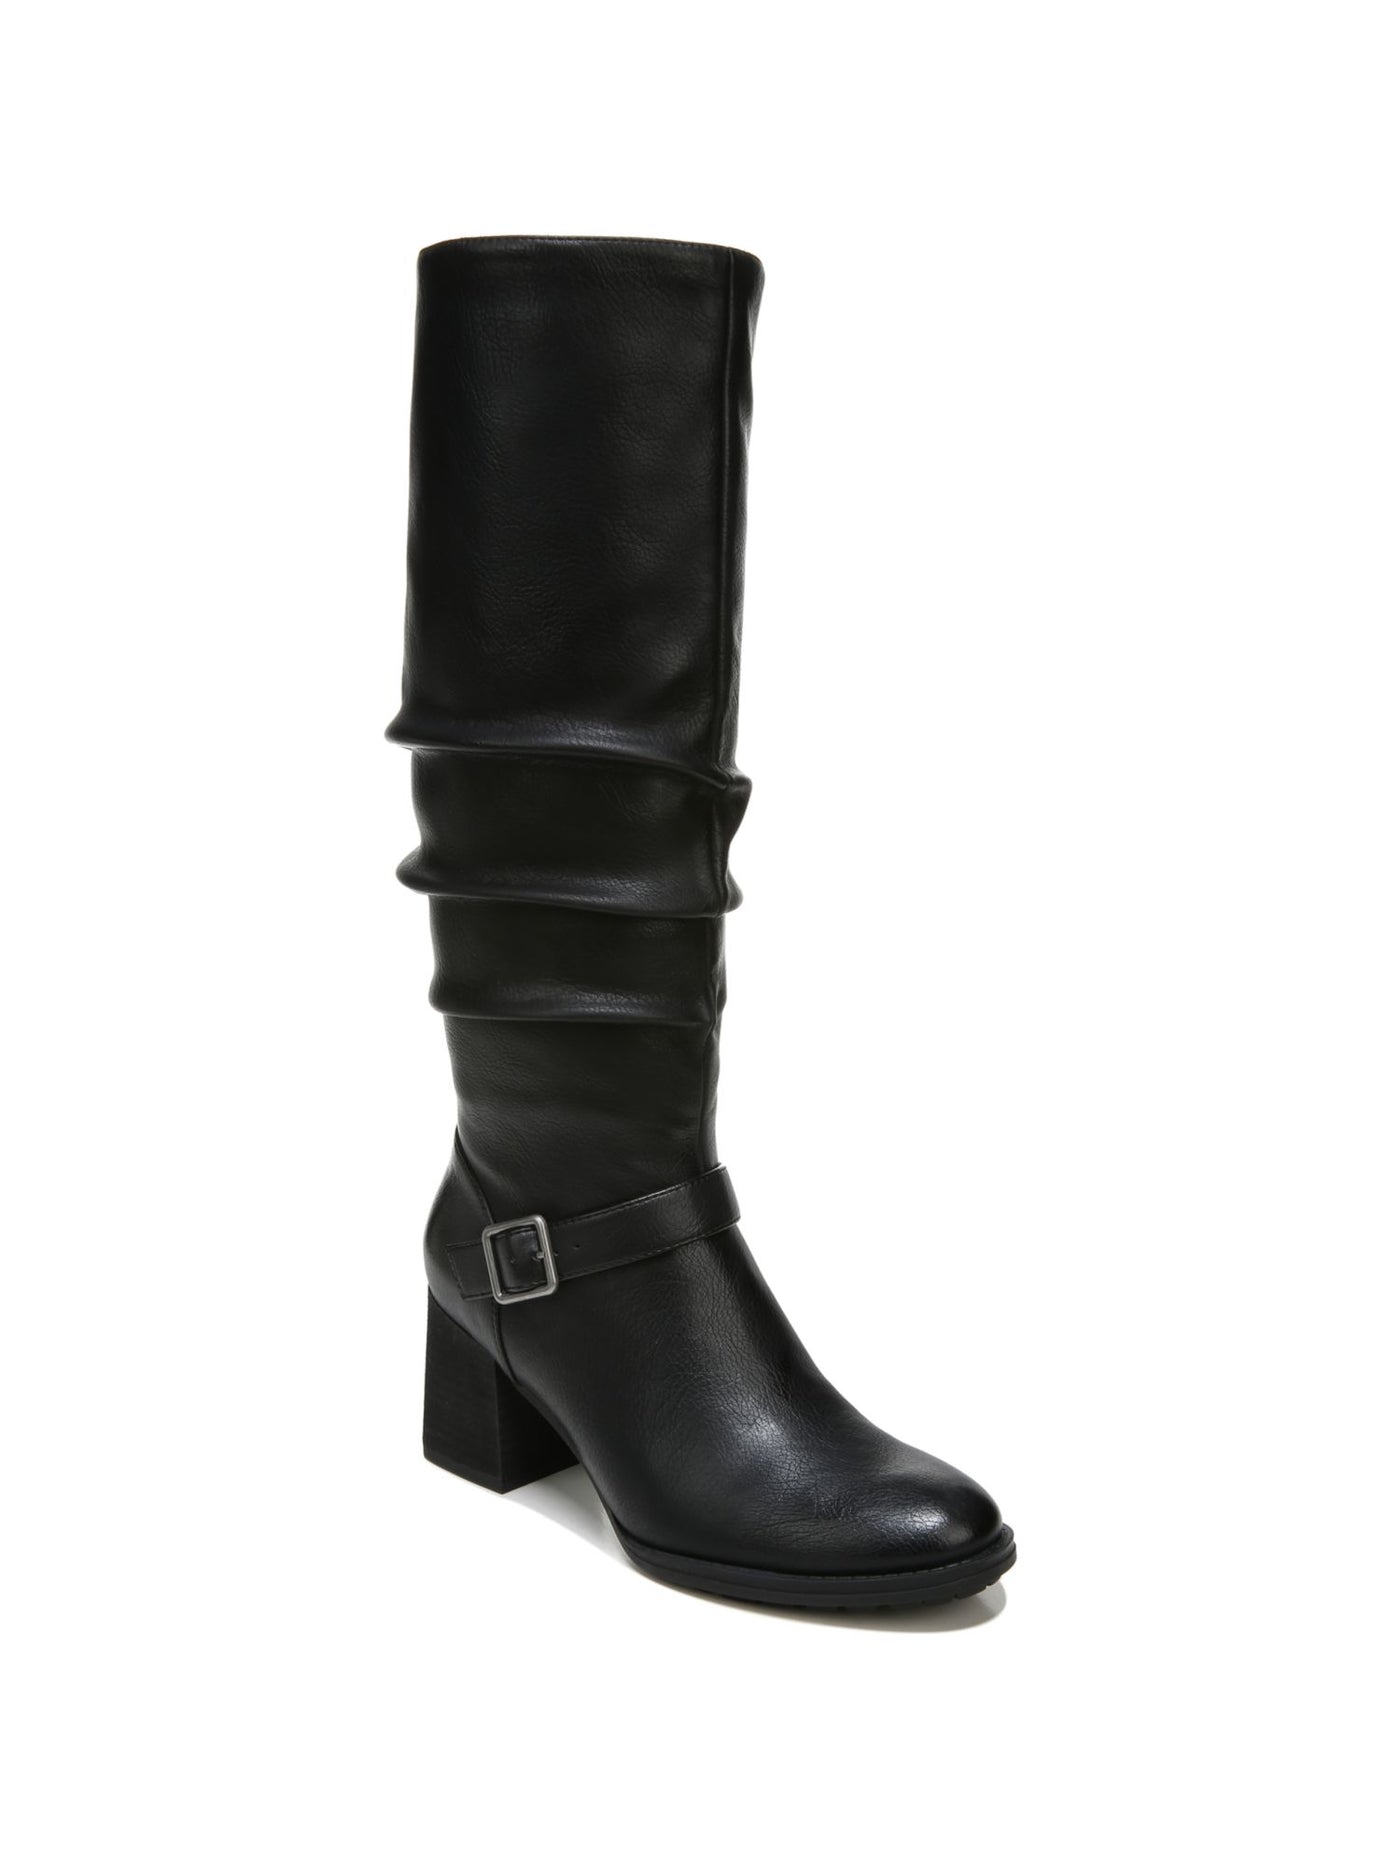 SOUL Womens Black Buckle Accent Frost Round Toe Block Heel Zip-Up Slouch Boot 8.5 M WC